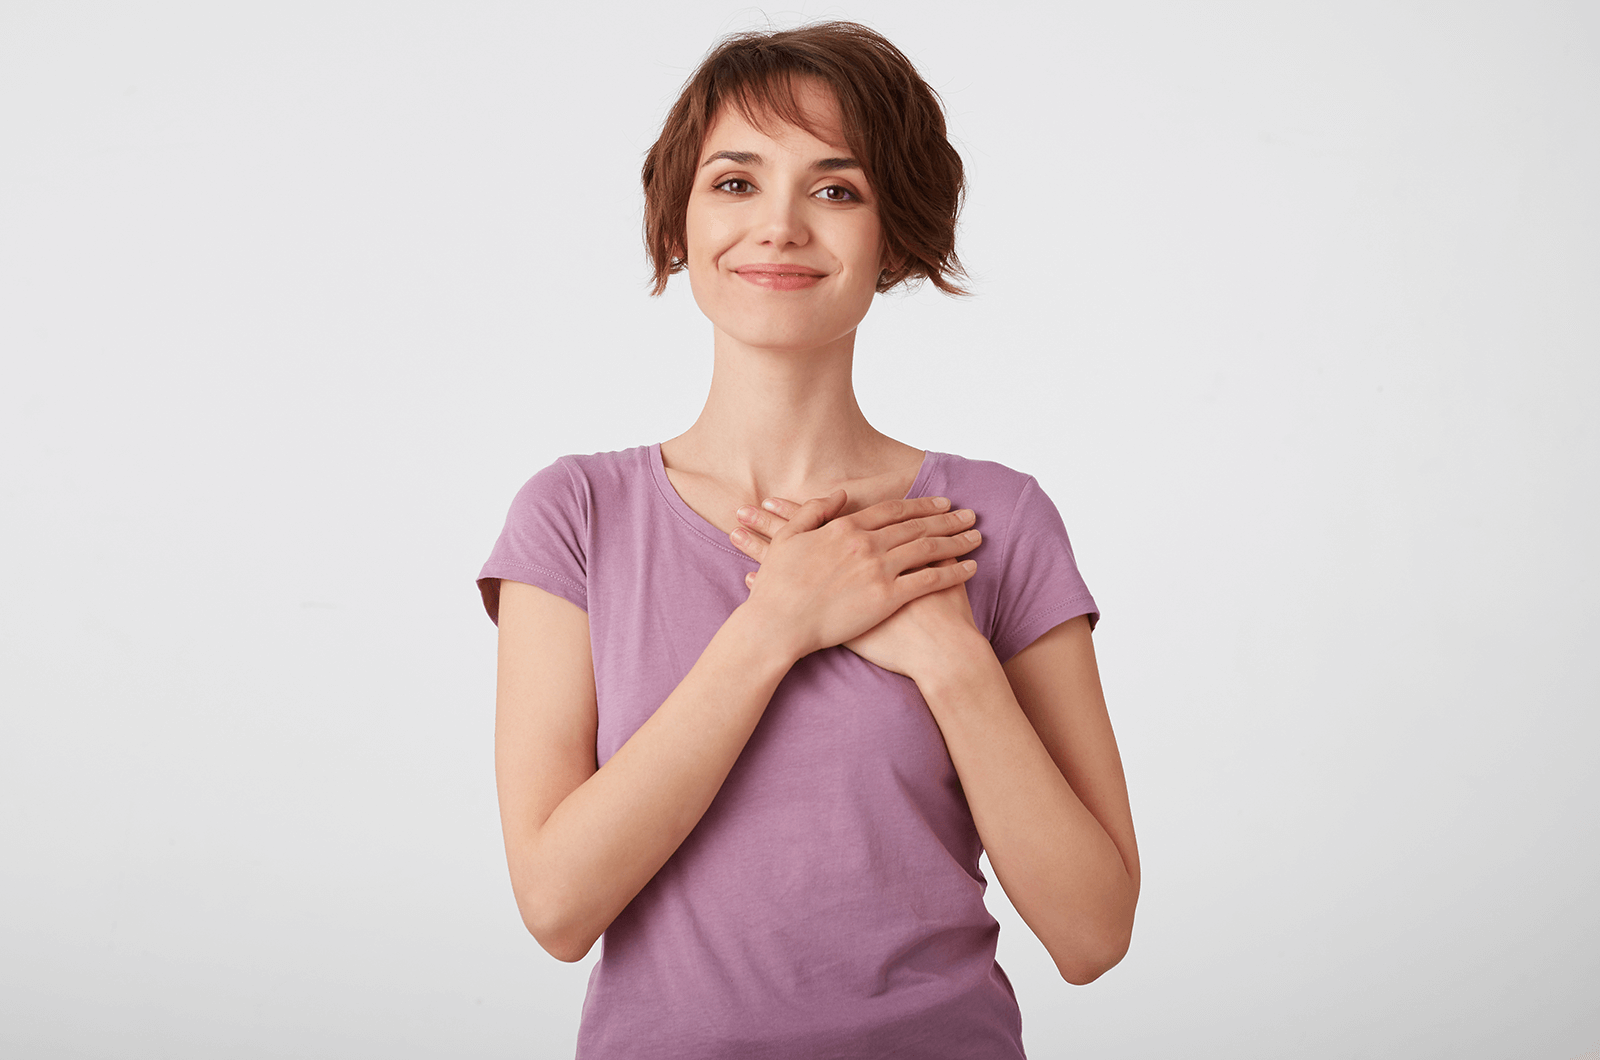 Woman in pink shirt holding hands over her heart while smiling